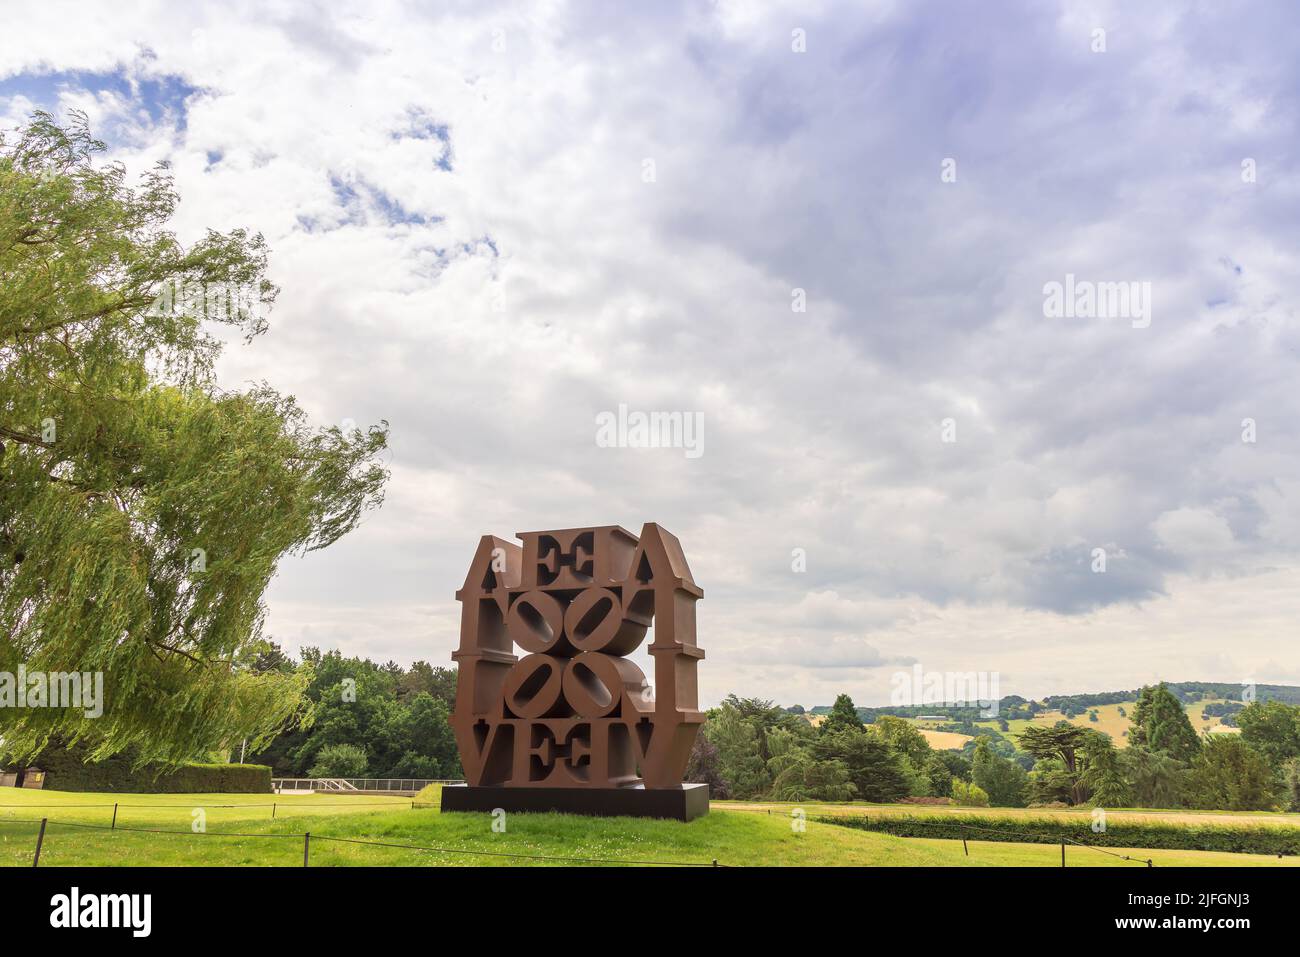 LOVE WALL, 1966-2006 sculpture by American artist Robert Indiana, as displayed at the YSP near Wakefield, UK. Stock Photo